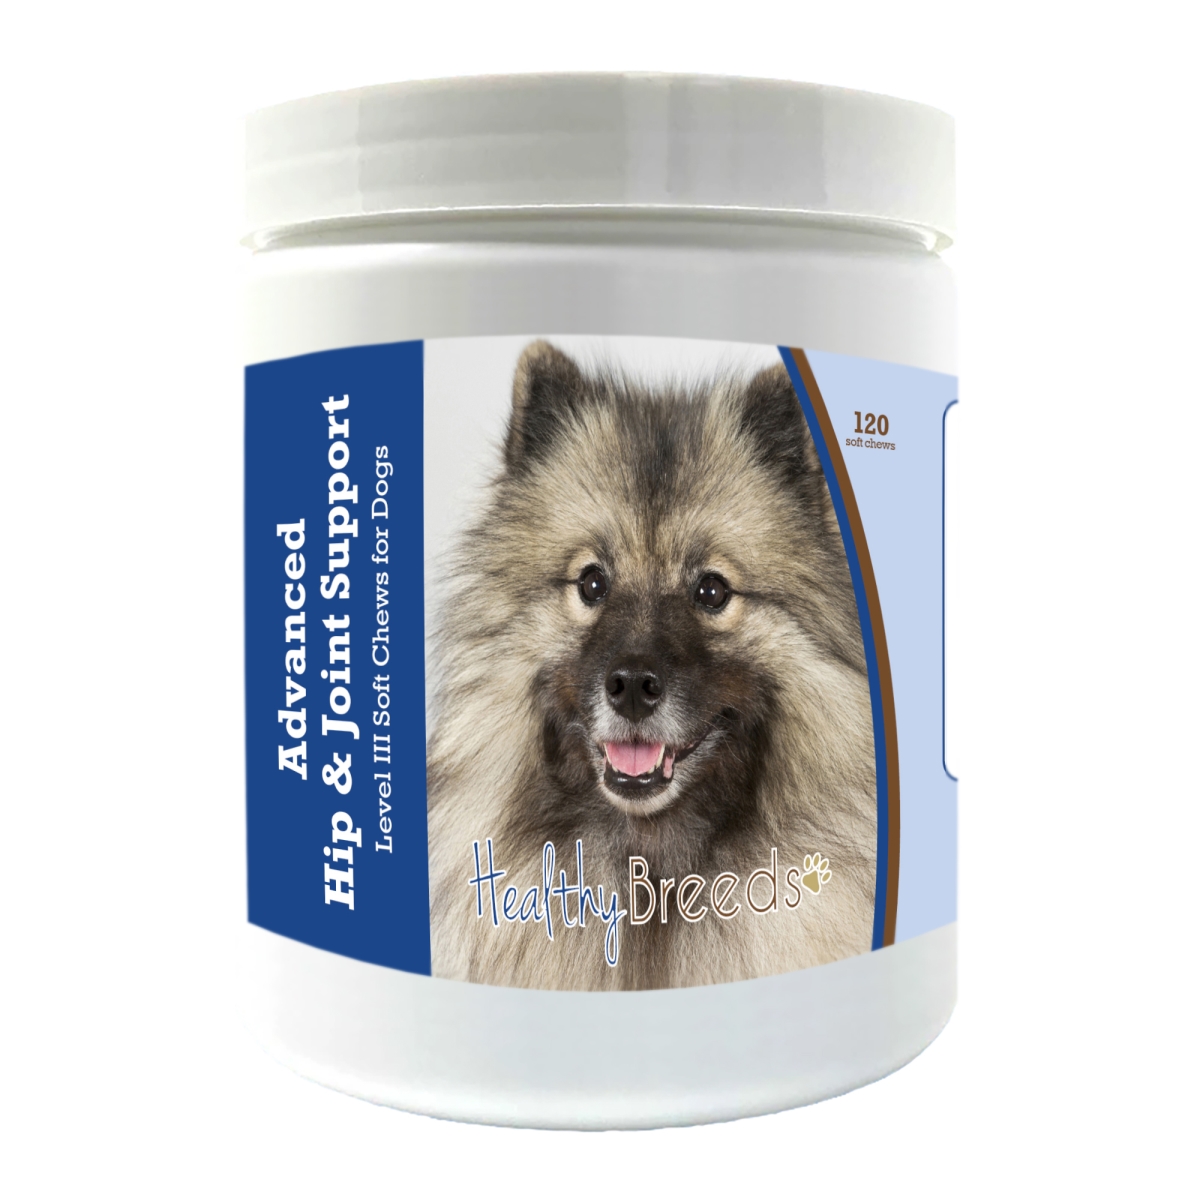 Picture of Healthy Breeds 192959898507 Keeshonden Advanced Hip & Joint Support Level III Soft Chews for Dogs